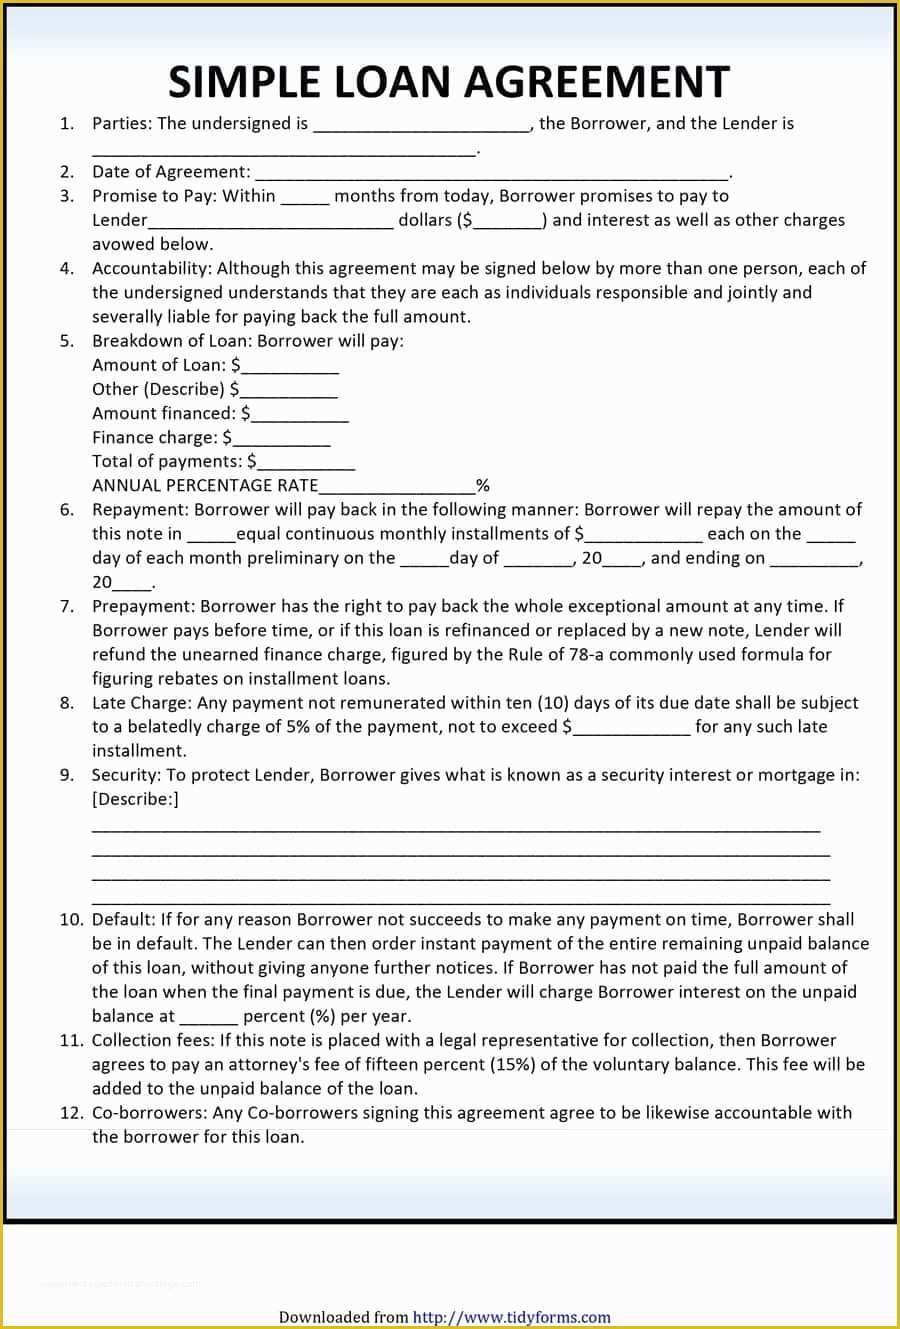 Free Template for Loan Agreement Between Friends Of 40 Free Loan Agreement Templates [word & Pdf] Template Lab